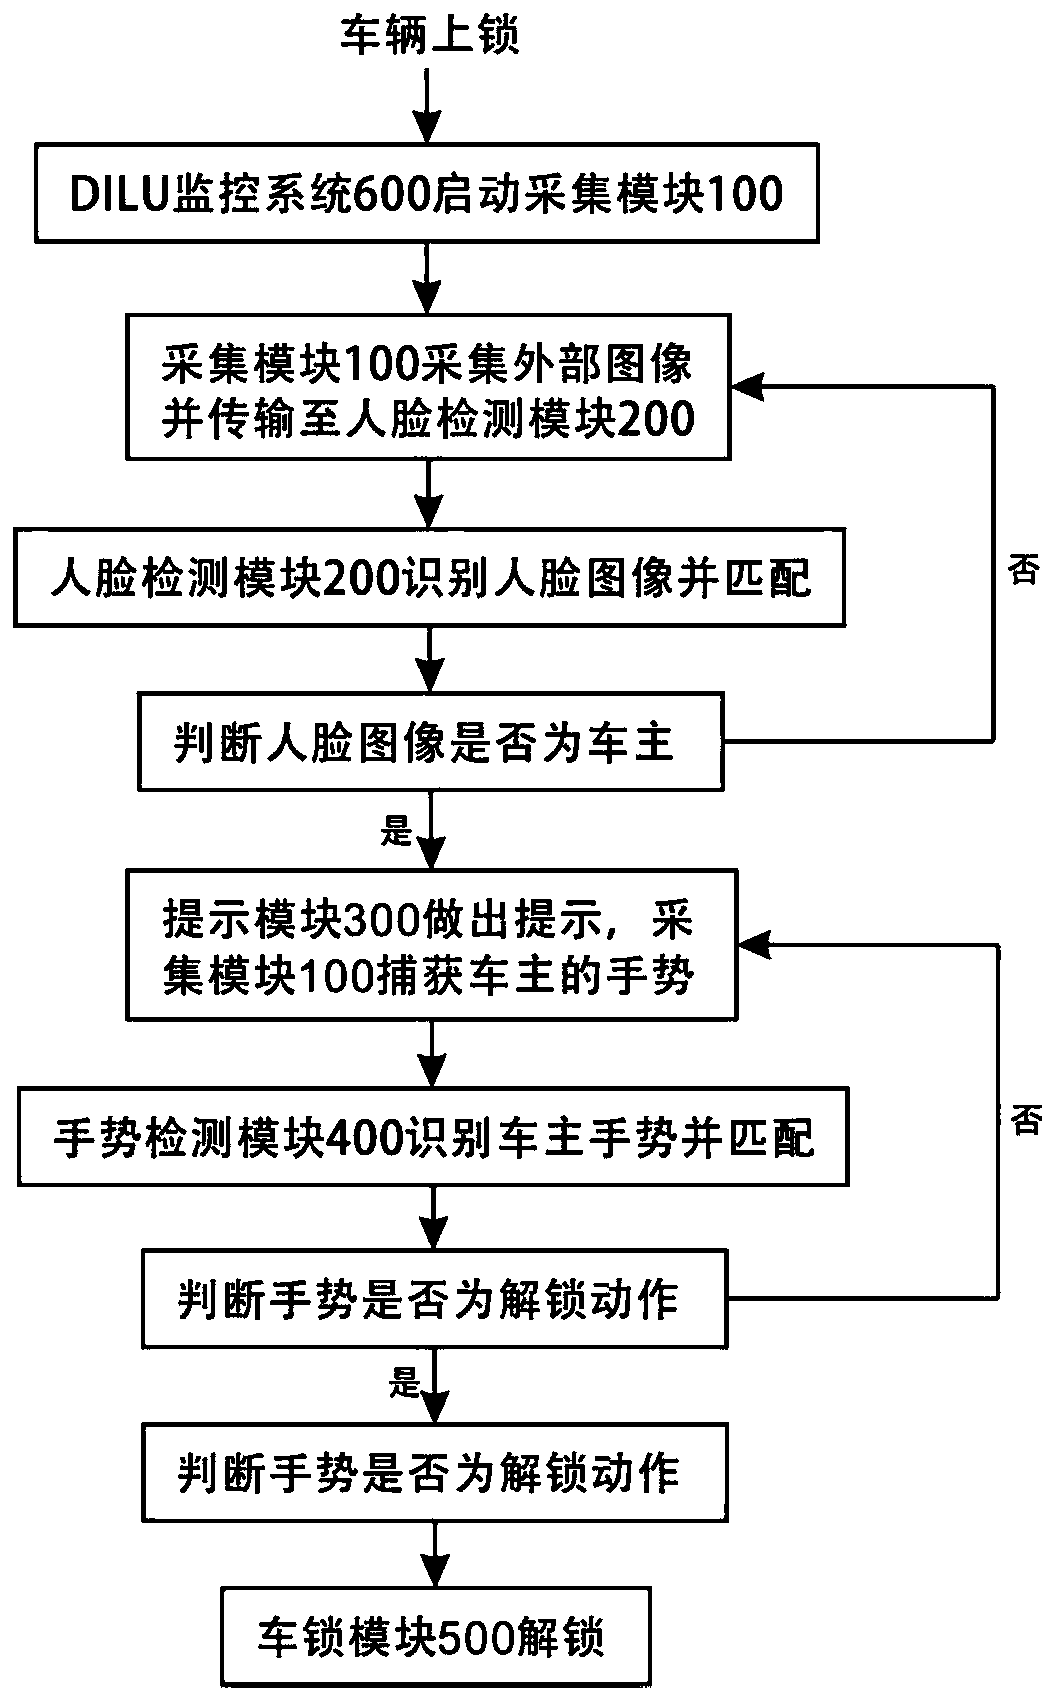 Automobile automatic unlocking control method and system based on face and gesture recognition